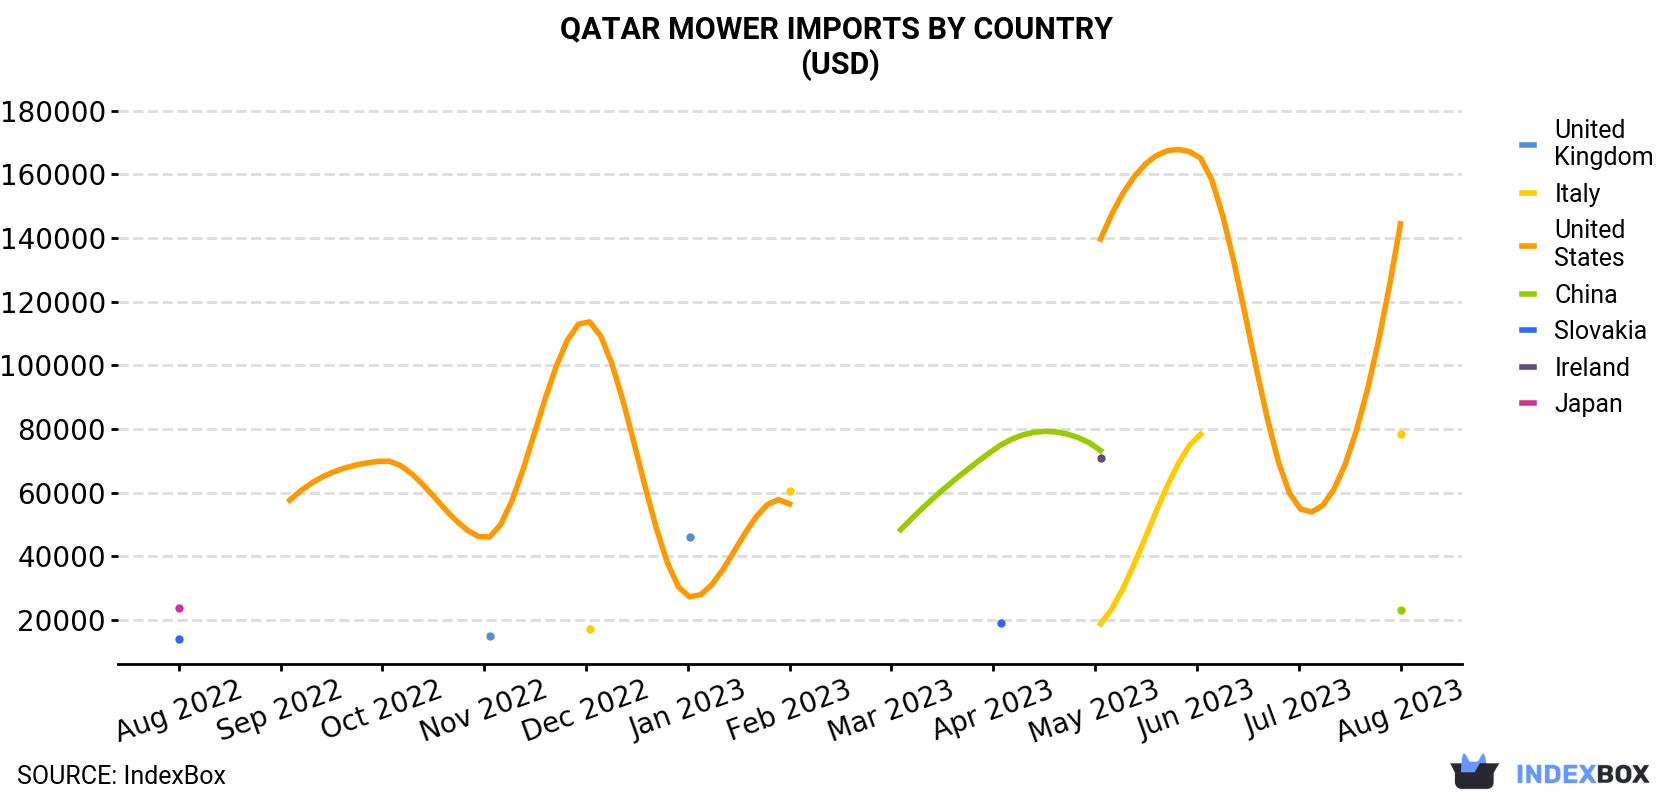 Qatar Mower Imports By Country (USD)